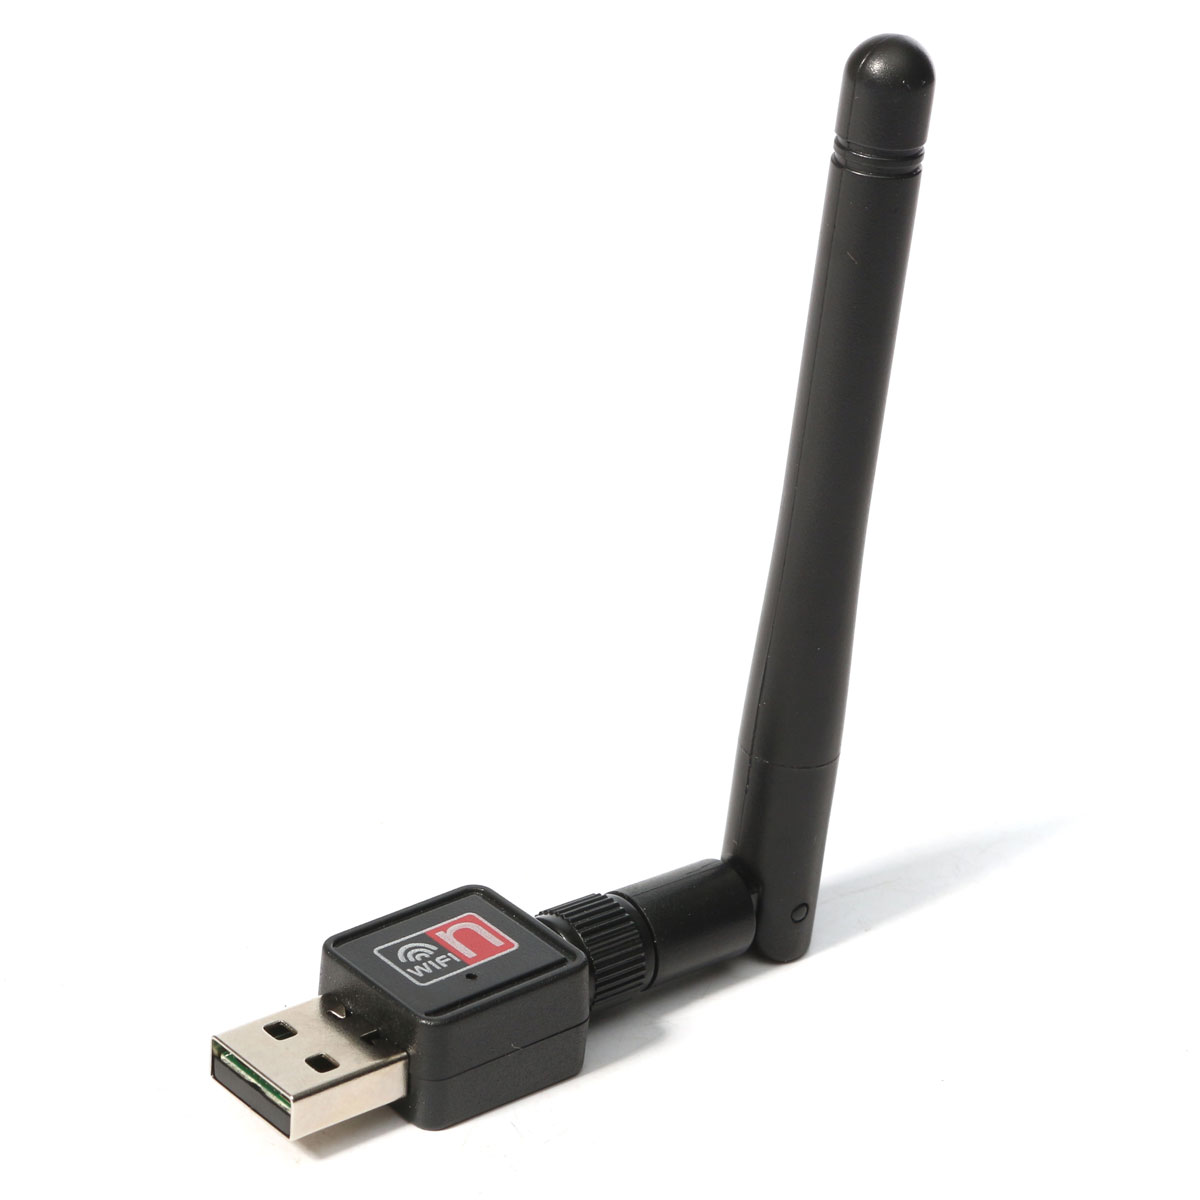 Wireless Network Adapter For Mac 10.4.11 Usb